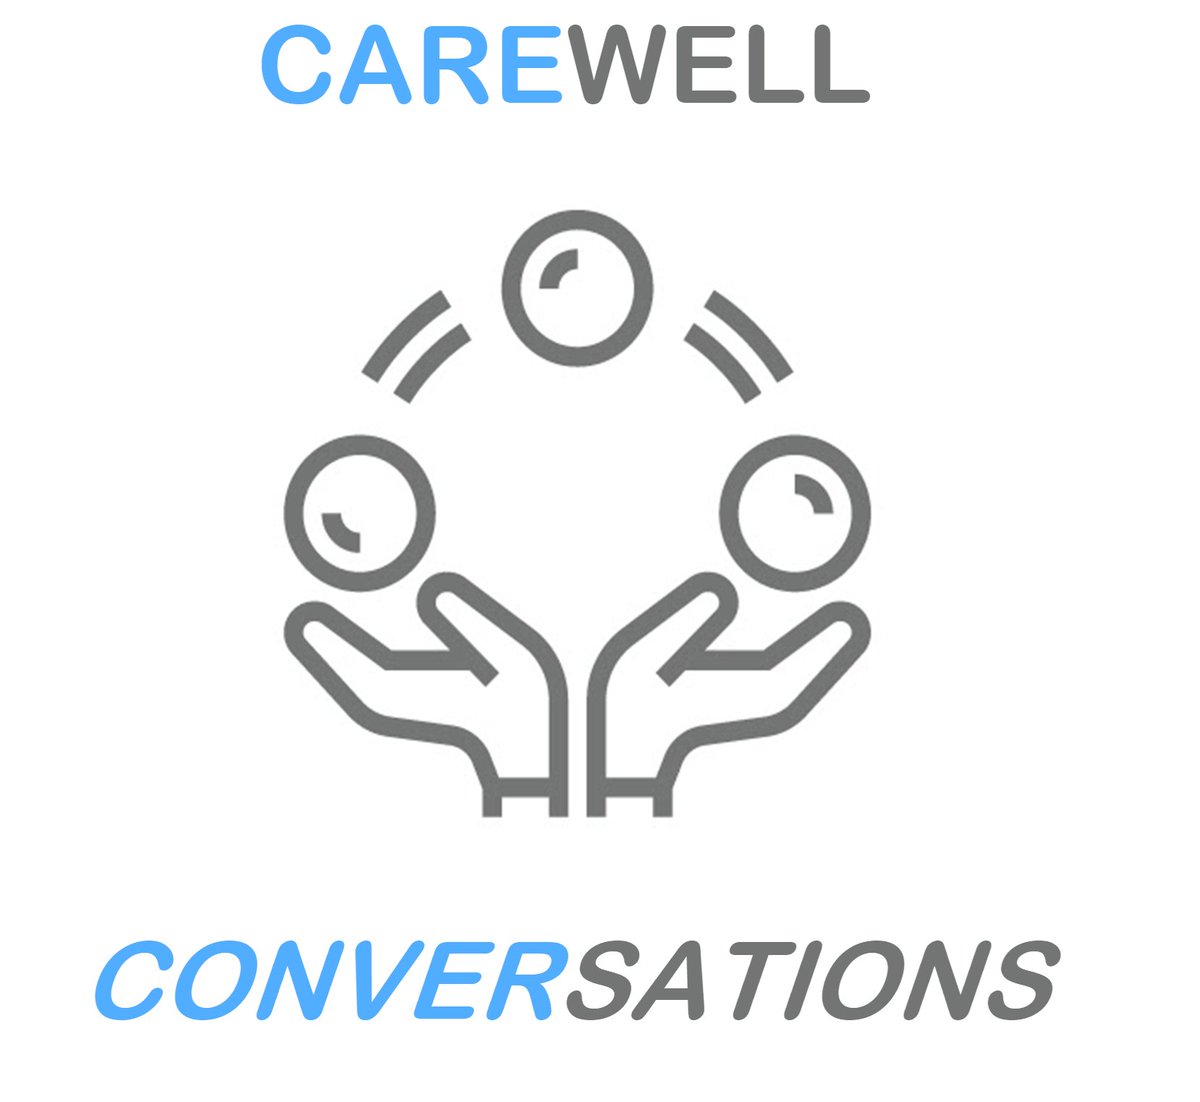 Tune in to Episode 4 of Series 2 of the CAREWELL Conversations podcast series #CAREWELL_Project, where young carers share their experience of caring while in education @CarersIreland, @YoungCarersIrl. @hrbireland, @Eurocarers_info, @CareAllianceIrl, carewellproject.com/carewell-podca…